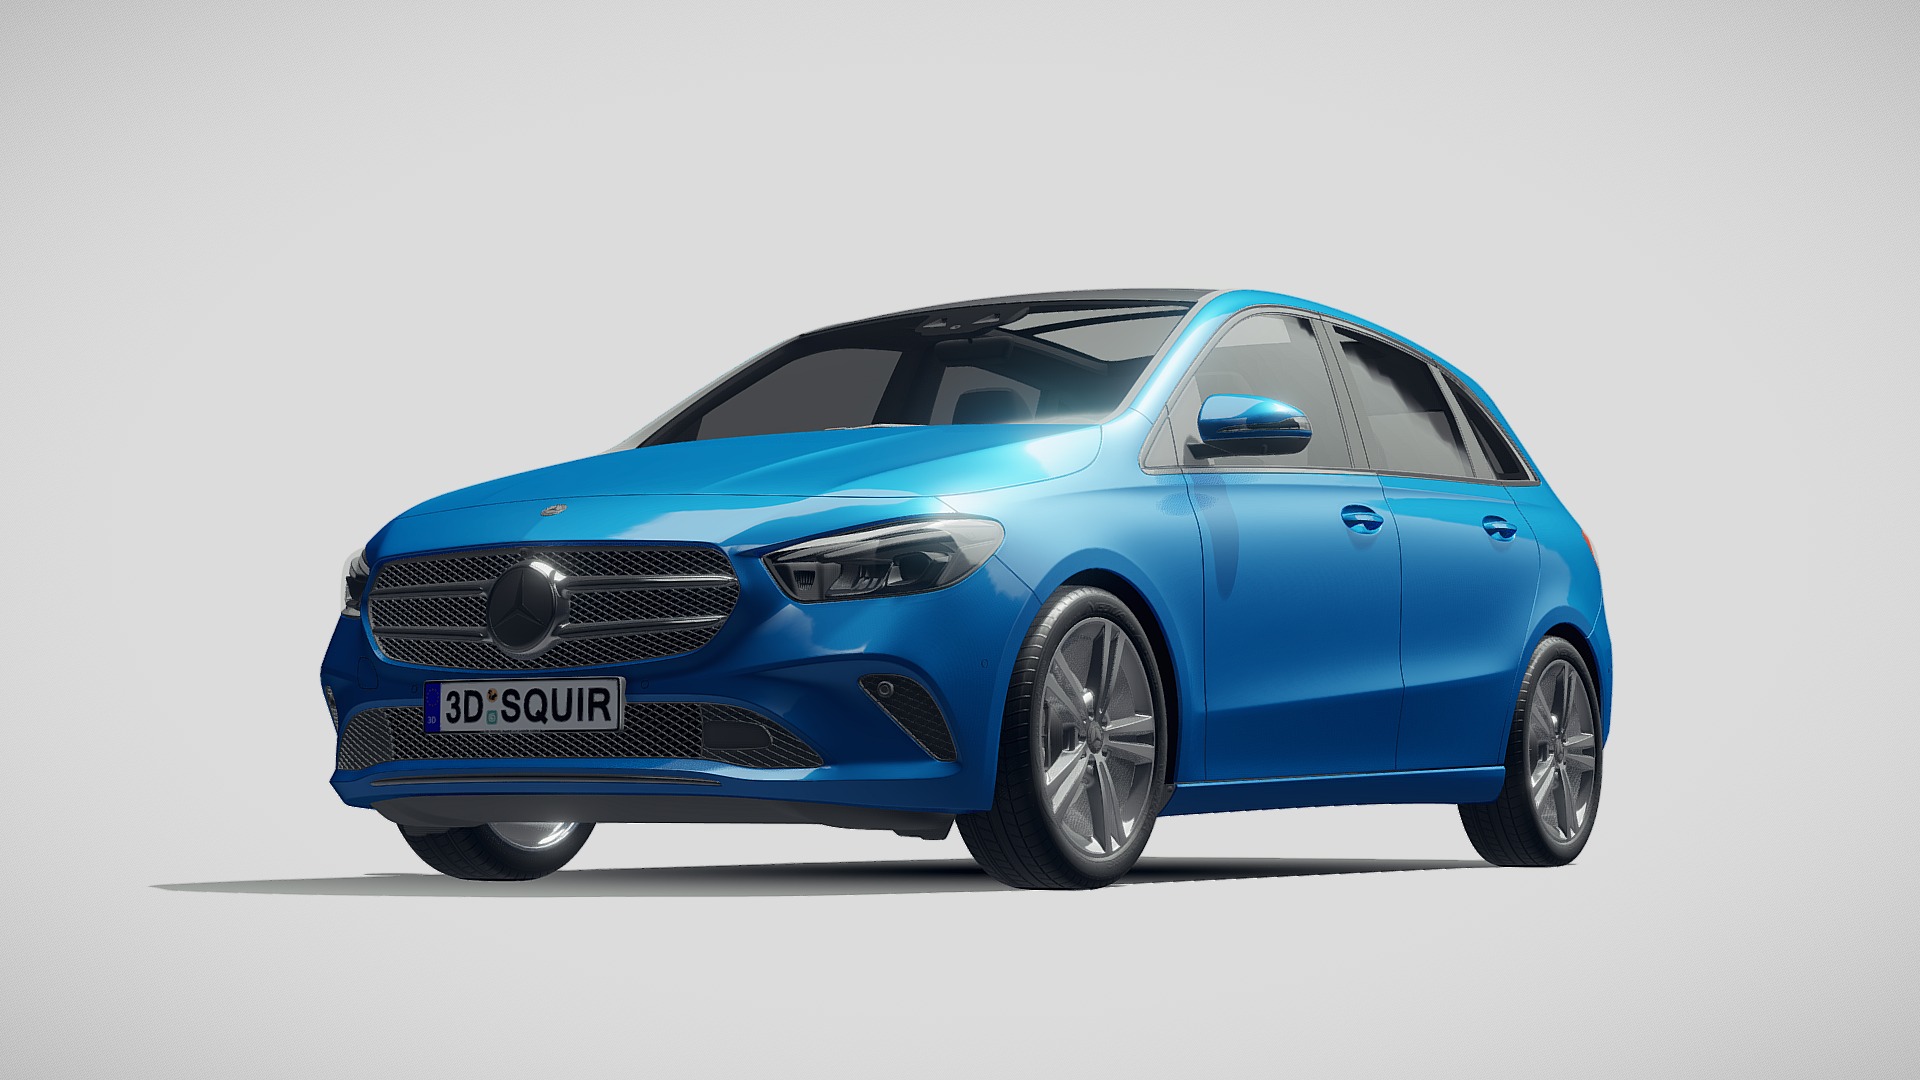 3D model Mercedes Benz B-class 2019 - This is a 3D model of the Mercedes Benz B-class 2019. The 3D model is about a blue car with a white background.